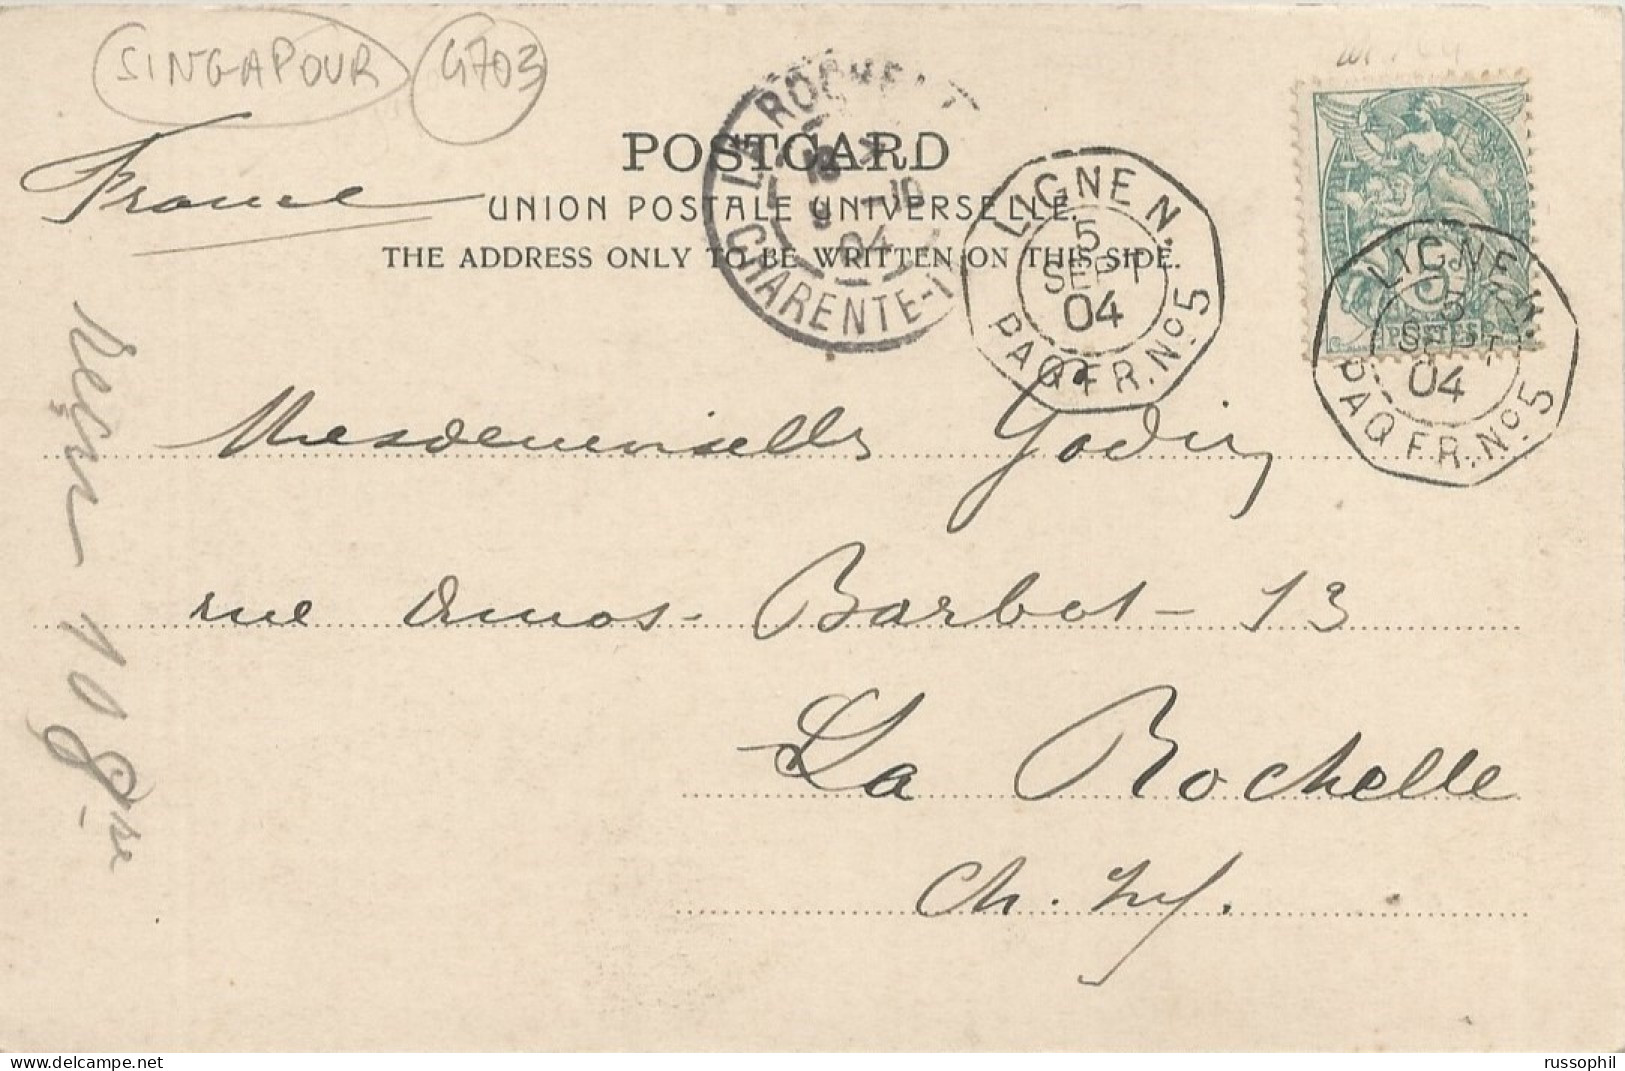 FRANCE - SEA POST- "LIGNE N" DEPARTURE PMK ON FRANKED PC (VIEW OF SINGAPORE) TO FRANCE - 1904 - Correo Marítimo